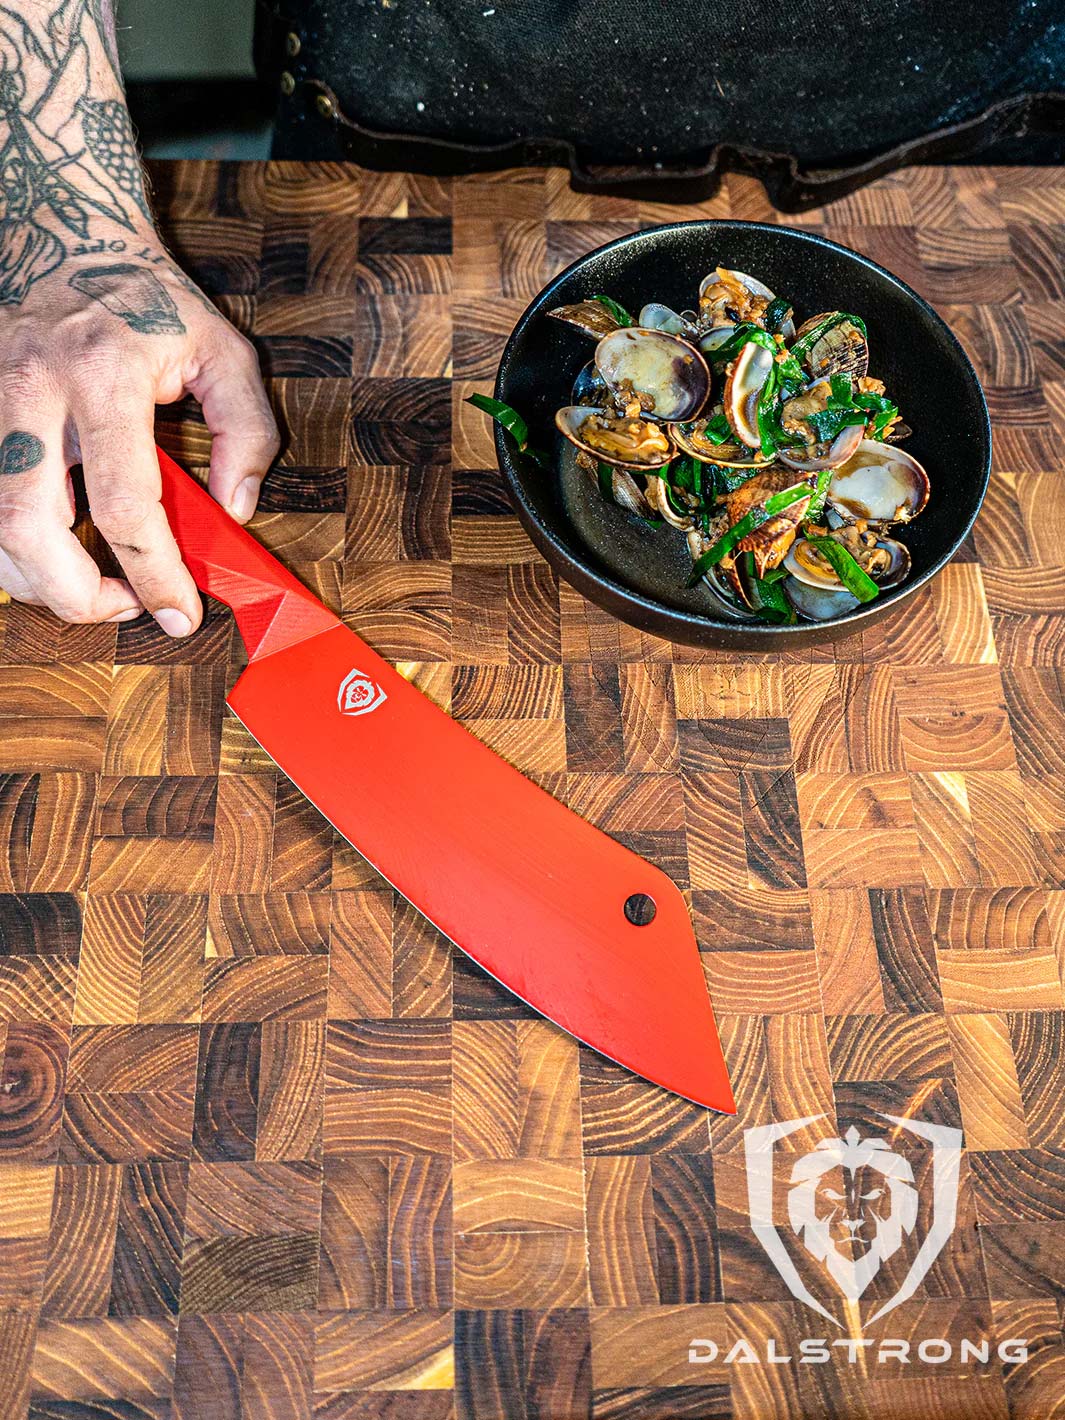 Chef Knife & Cleaver | The Crixus | Gladiator Series | Dalstrong